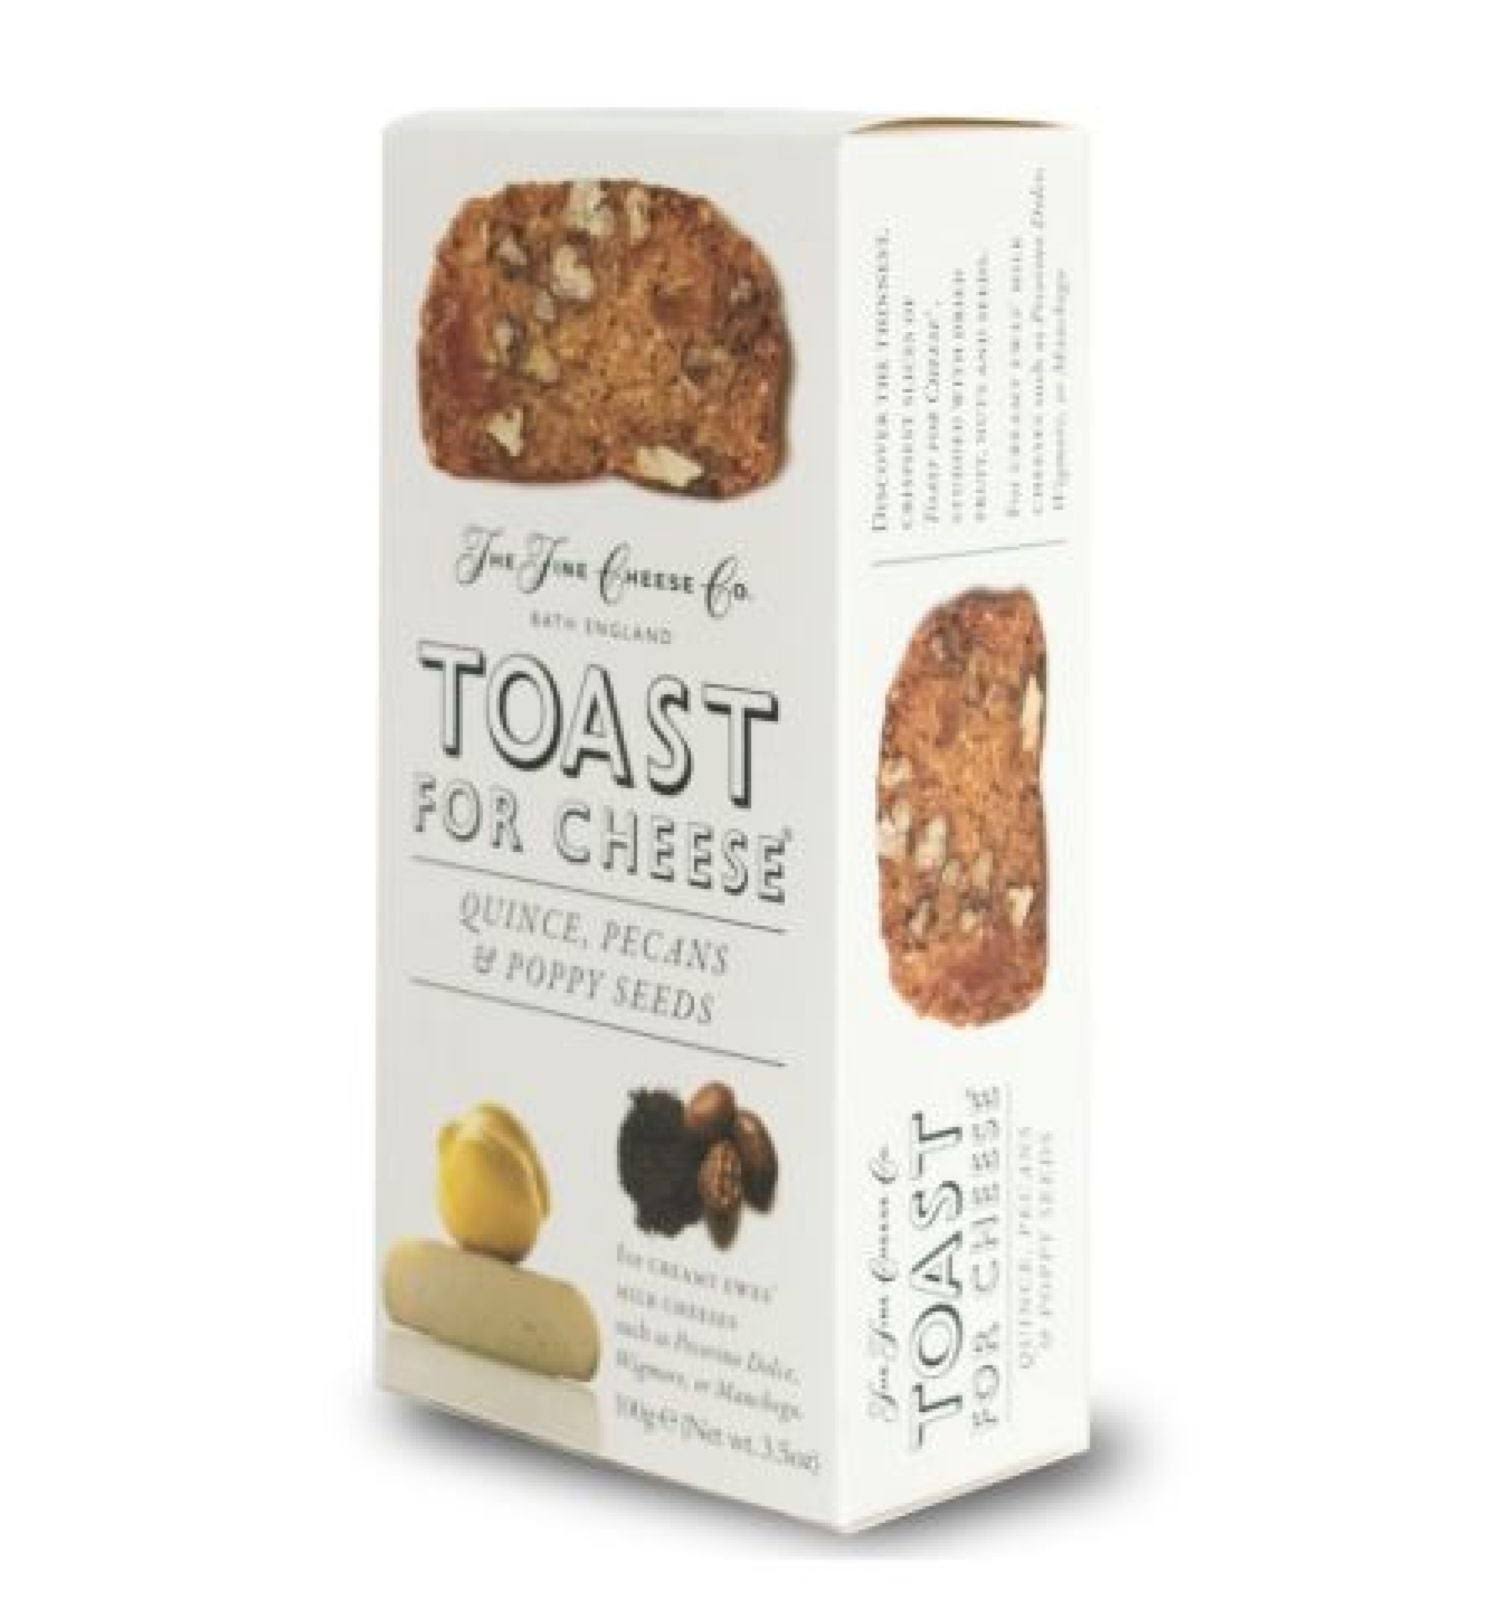 Toast for Cheese by The Fine Cheese Co - Quince and Pecans (3.2 Ounce)